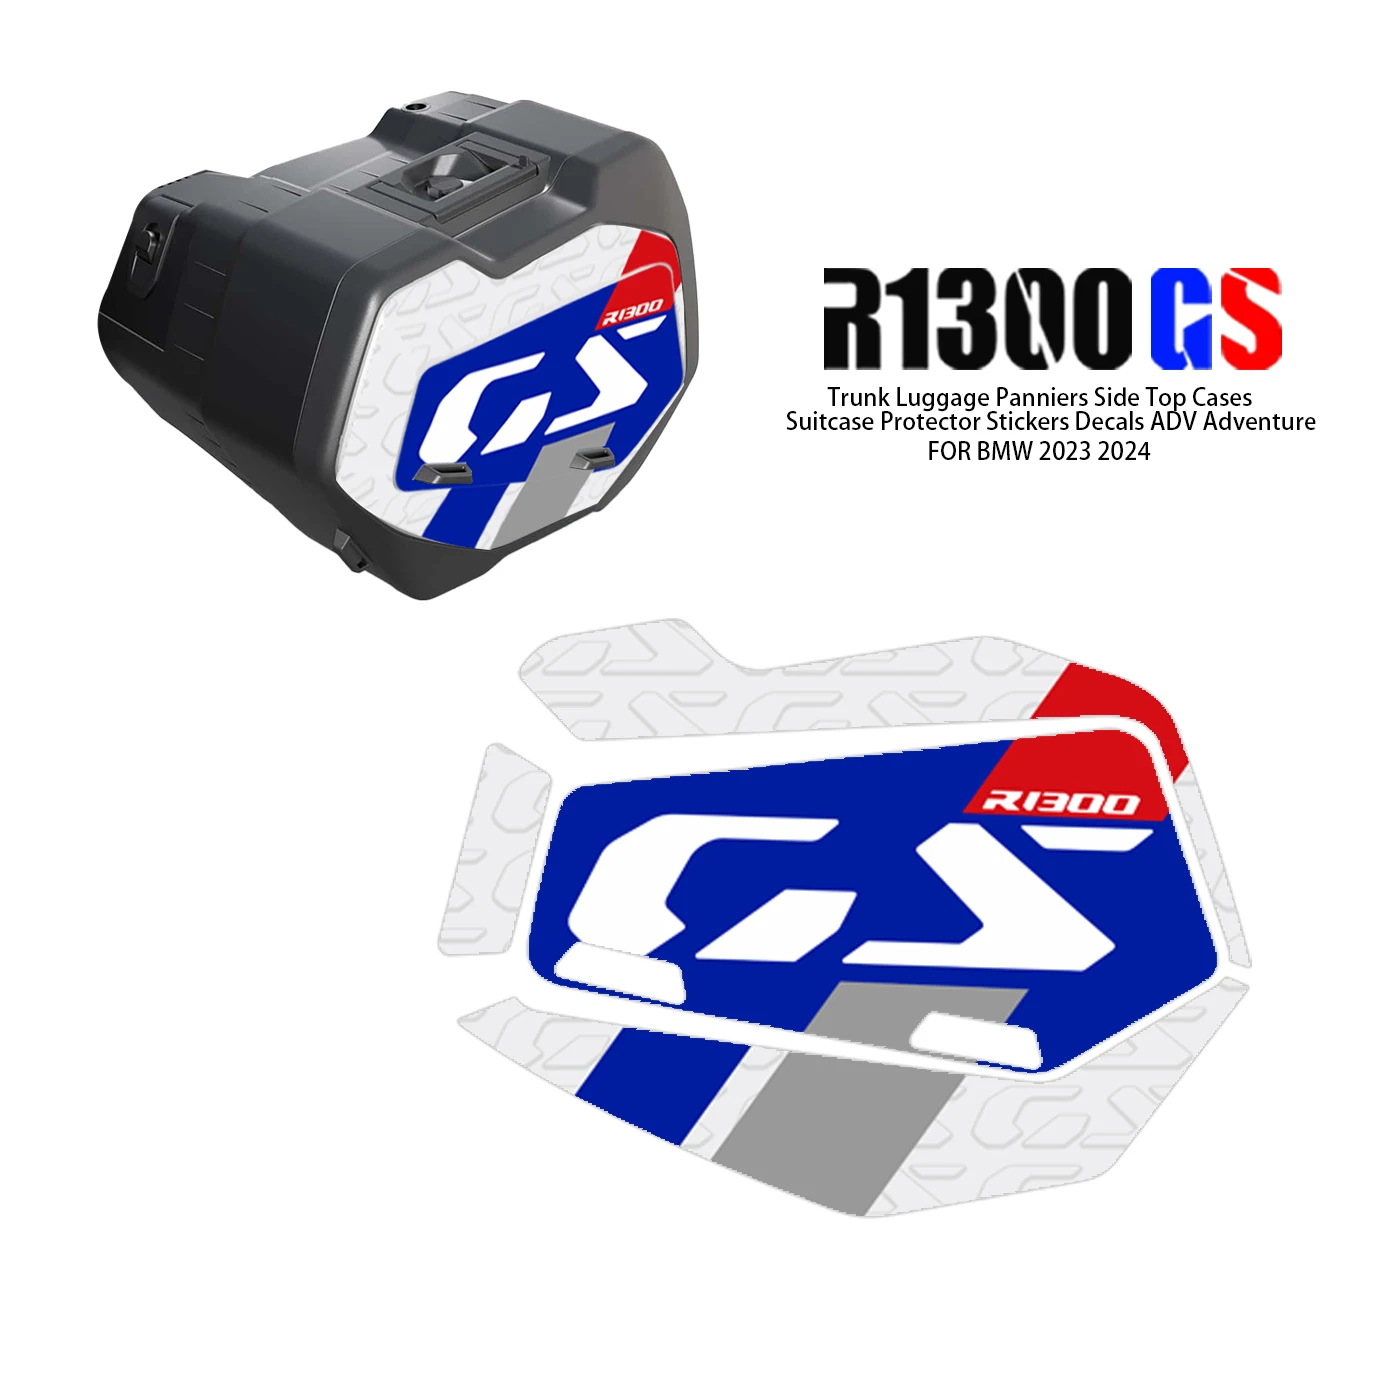 R1300GS FIT BMW 2023 2024 Trunk Luggage Panniers Side Top Cases Suitcase Protector Stickers Decals ADV Adventure